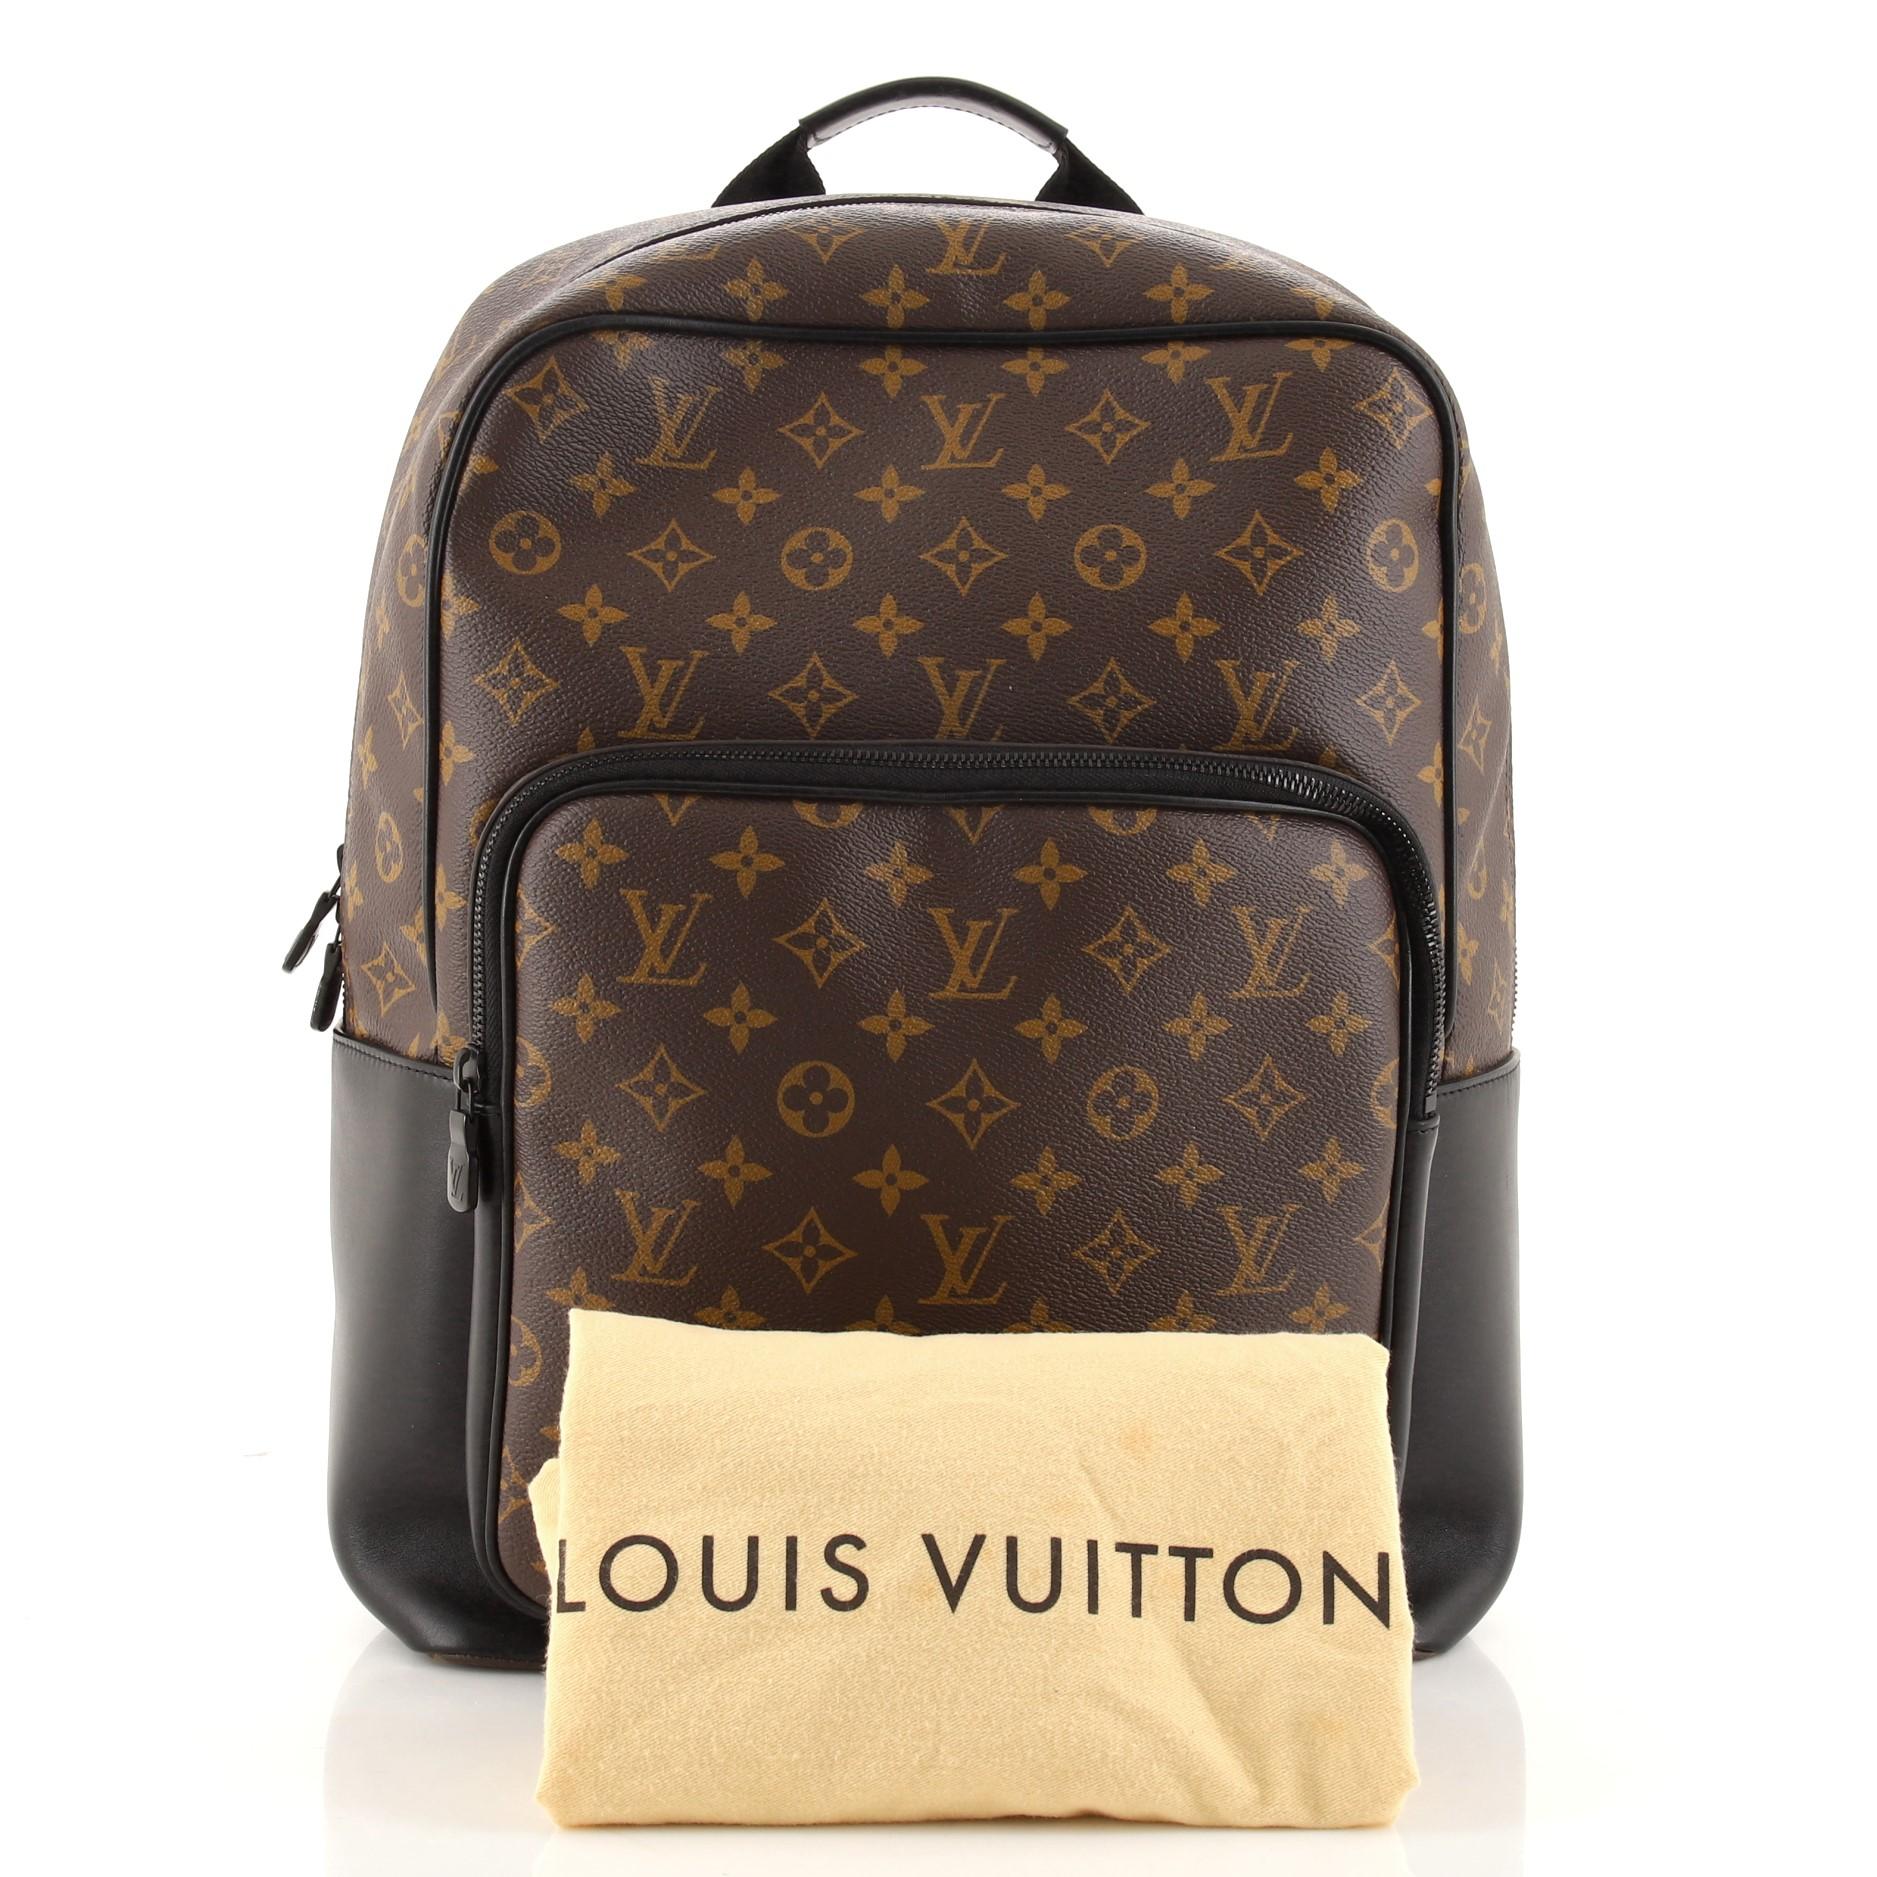 Louis Vuitton Dean Backpack Grey in Cowhide Leather - GB